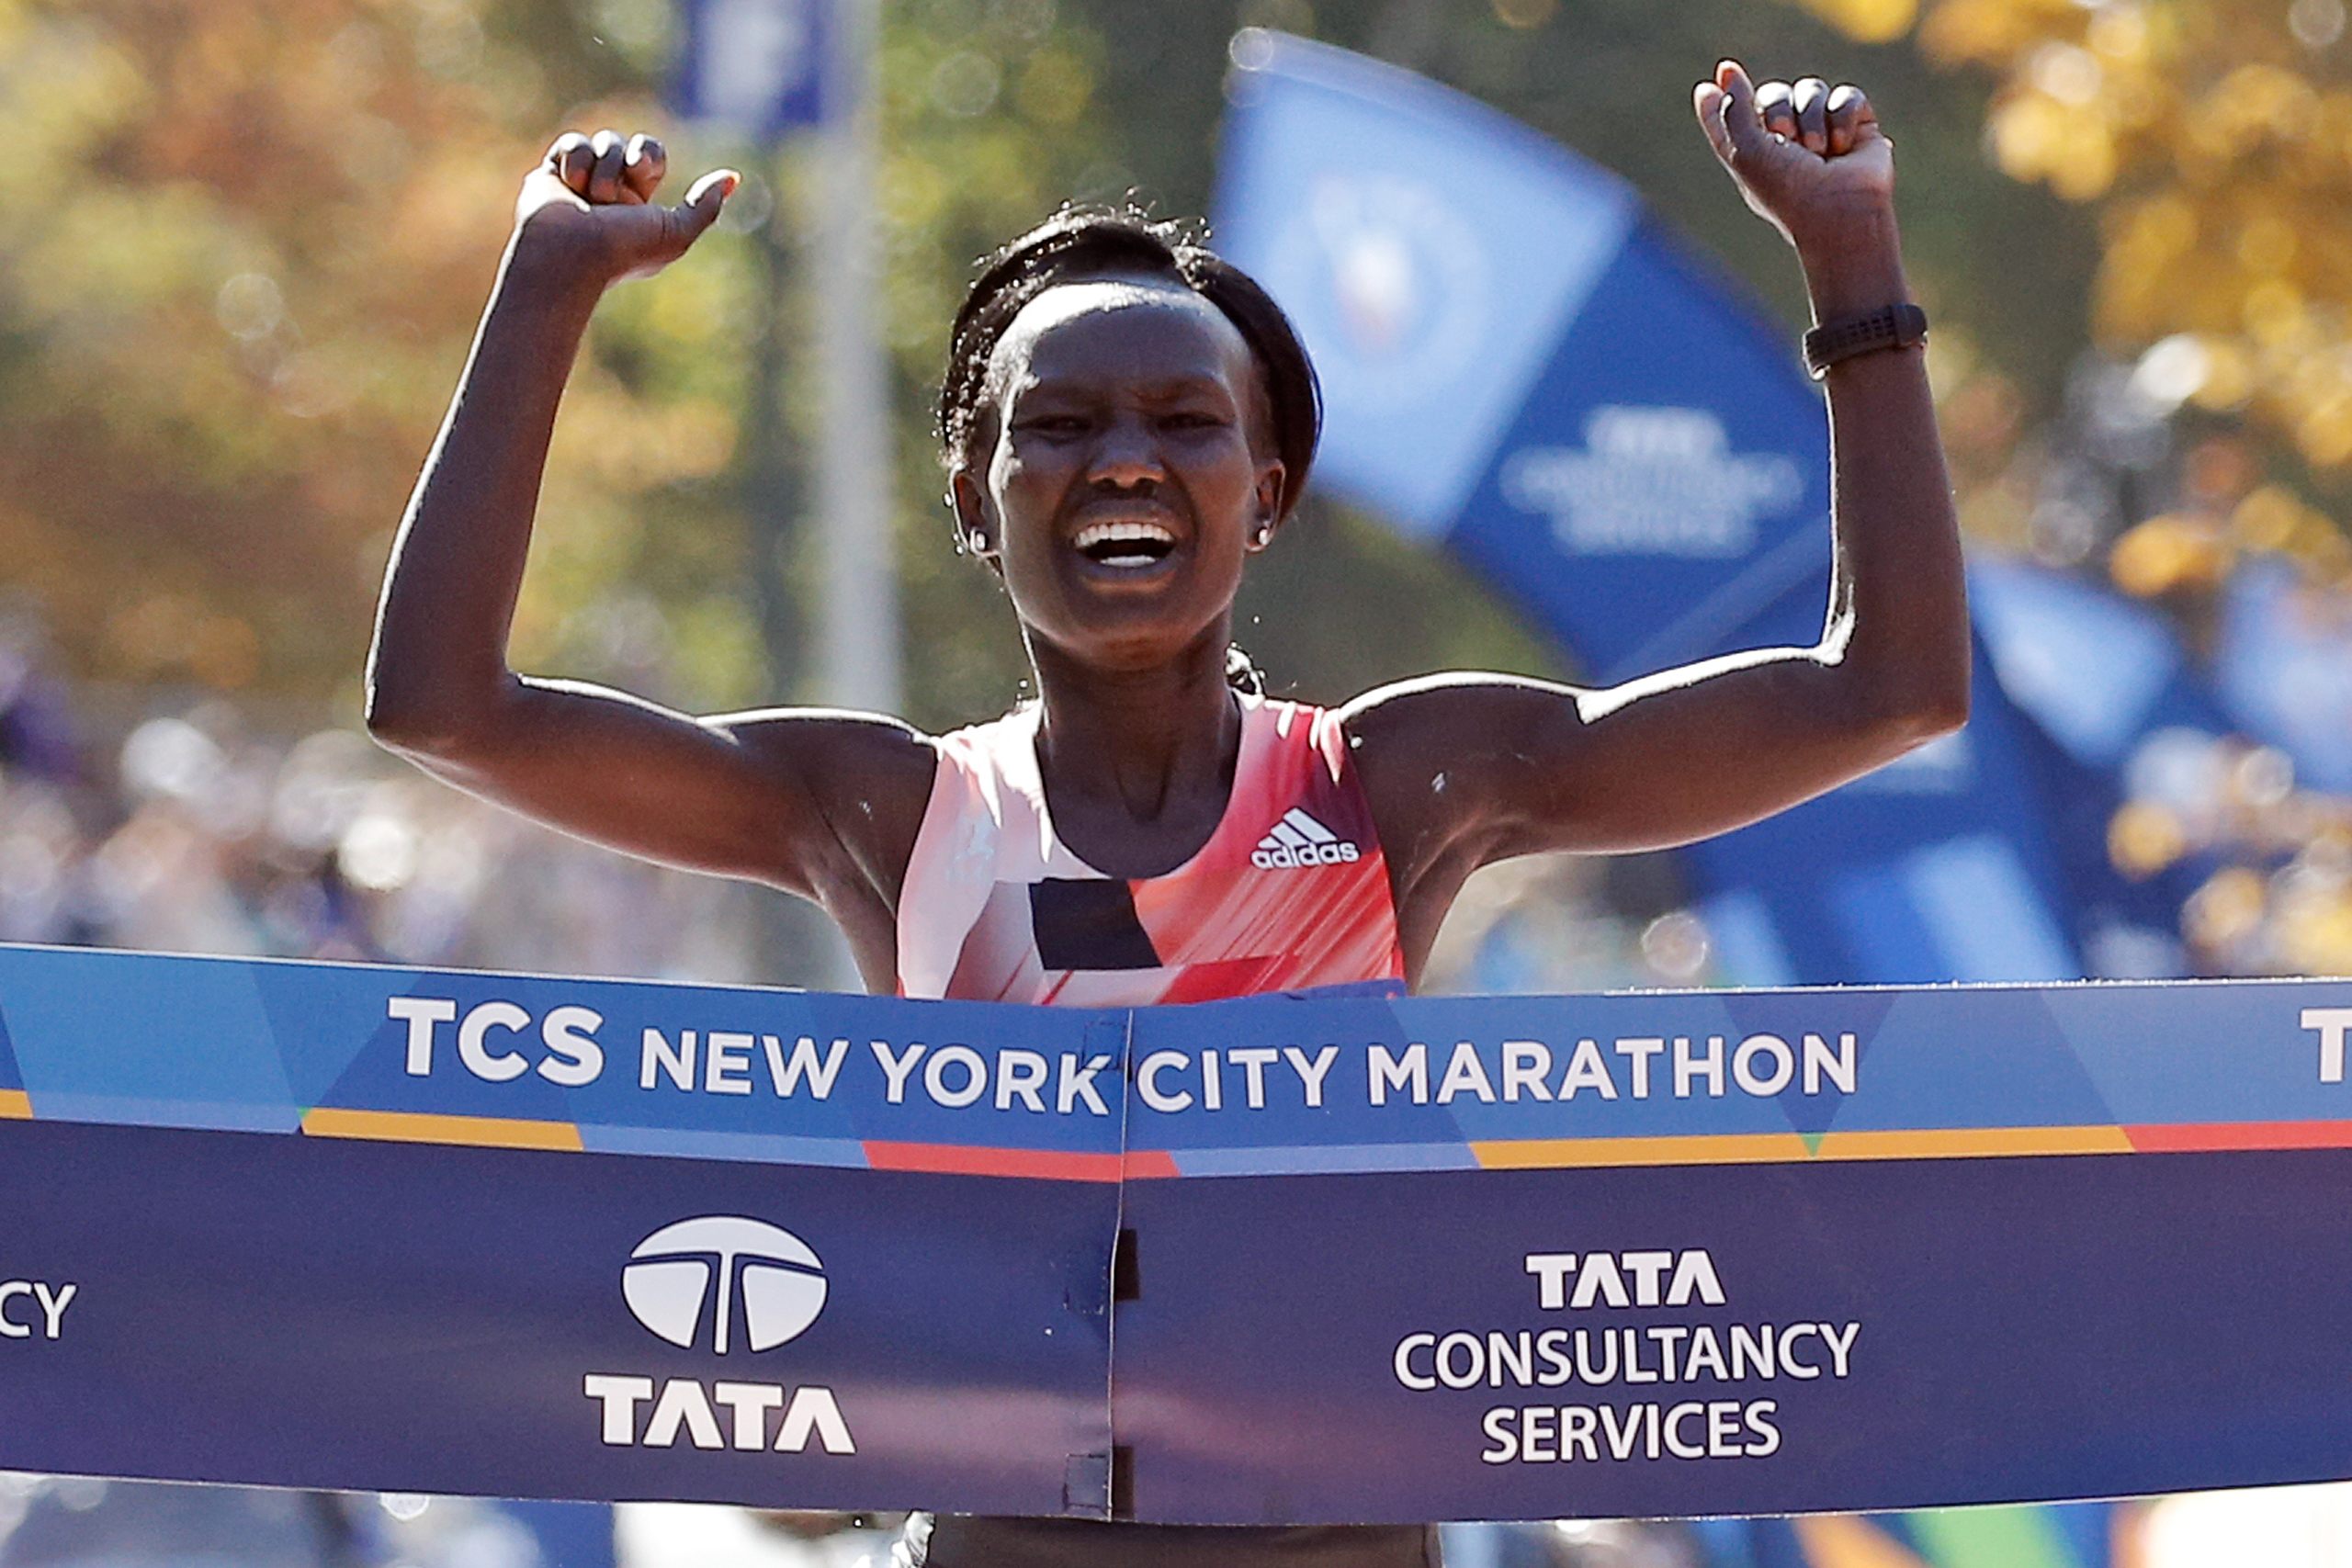 Mary Keitany of Kenya crosses the finish line to win the women's field of the 2016 New York City Marathon in New York City on Nov. 6, 2016. (Mike Segar—Reuters)